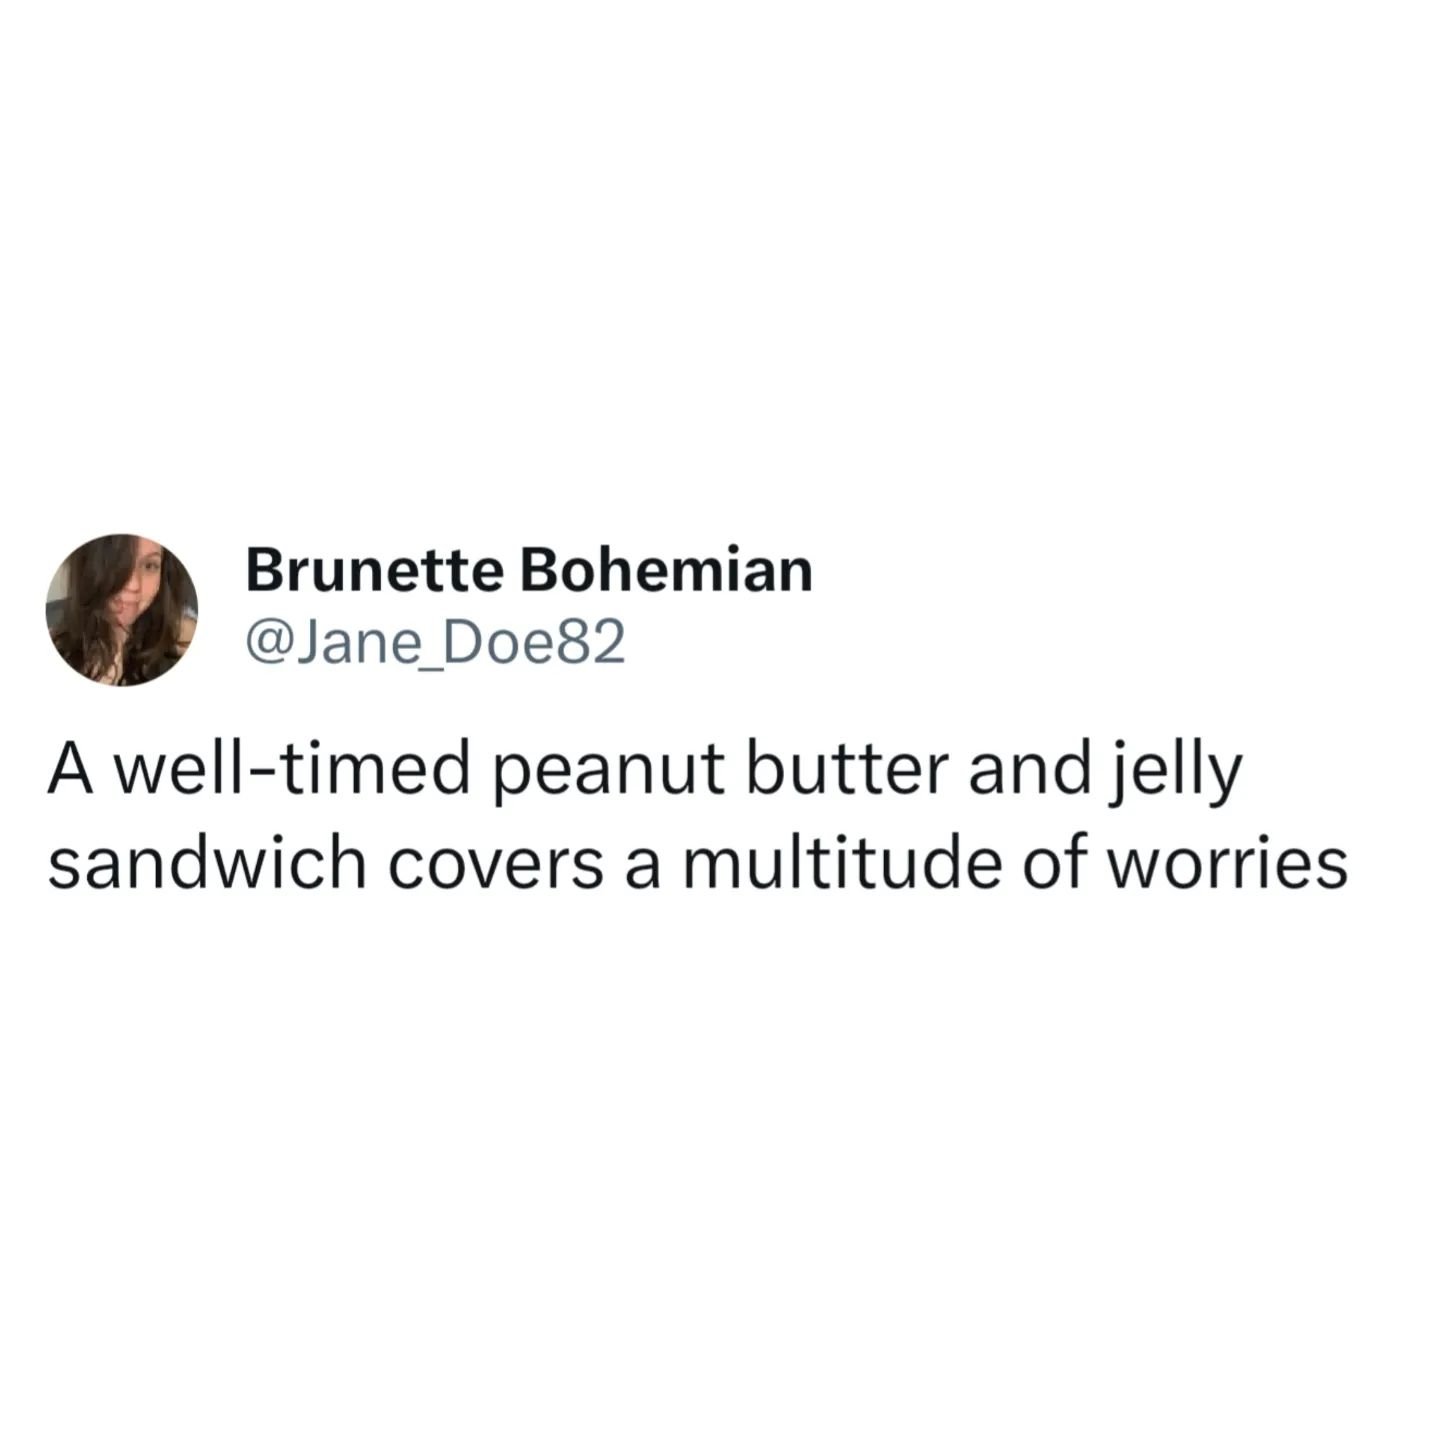 I am sorry to any and all people with peanut allergies and I wish you a very happy... jelly sandwich for your troubles 🥜🥪

Happy #MemeMonday! Make sure to check my stories for more laughs throughout the day!

If you want to be giggling every Monday